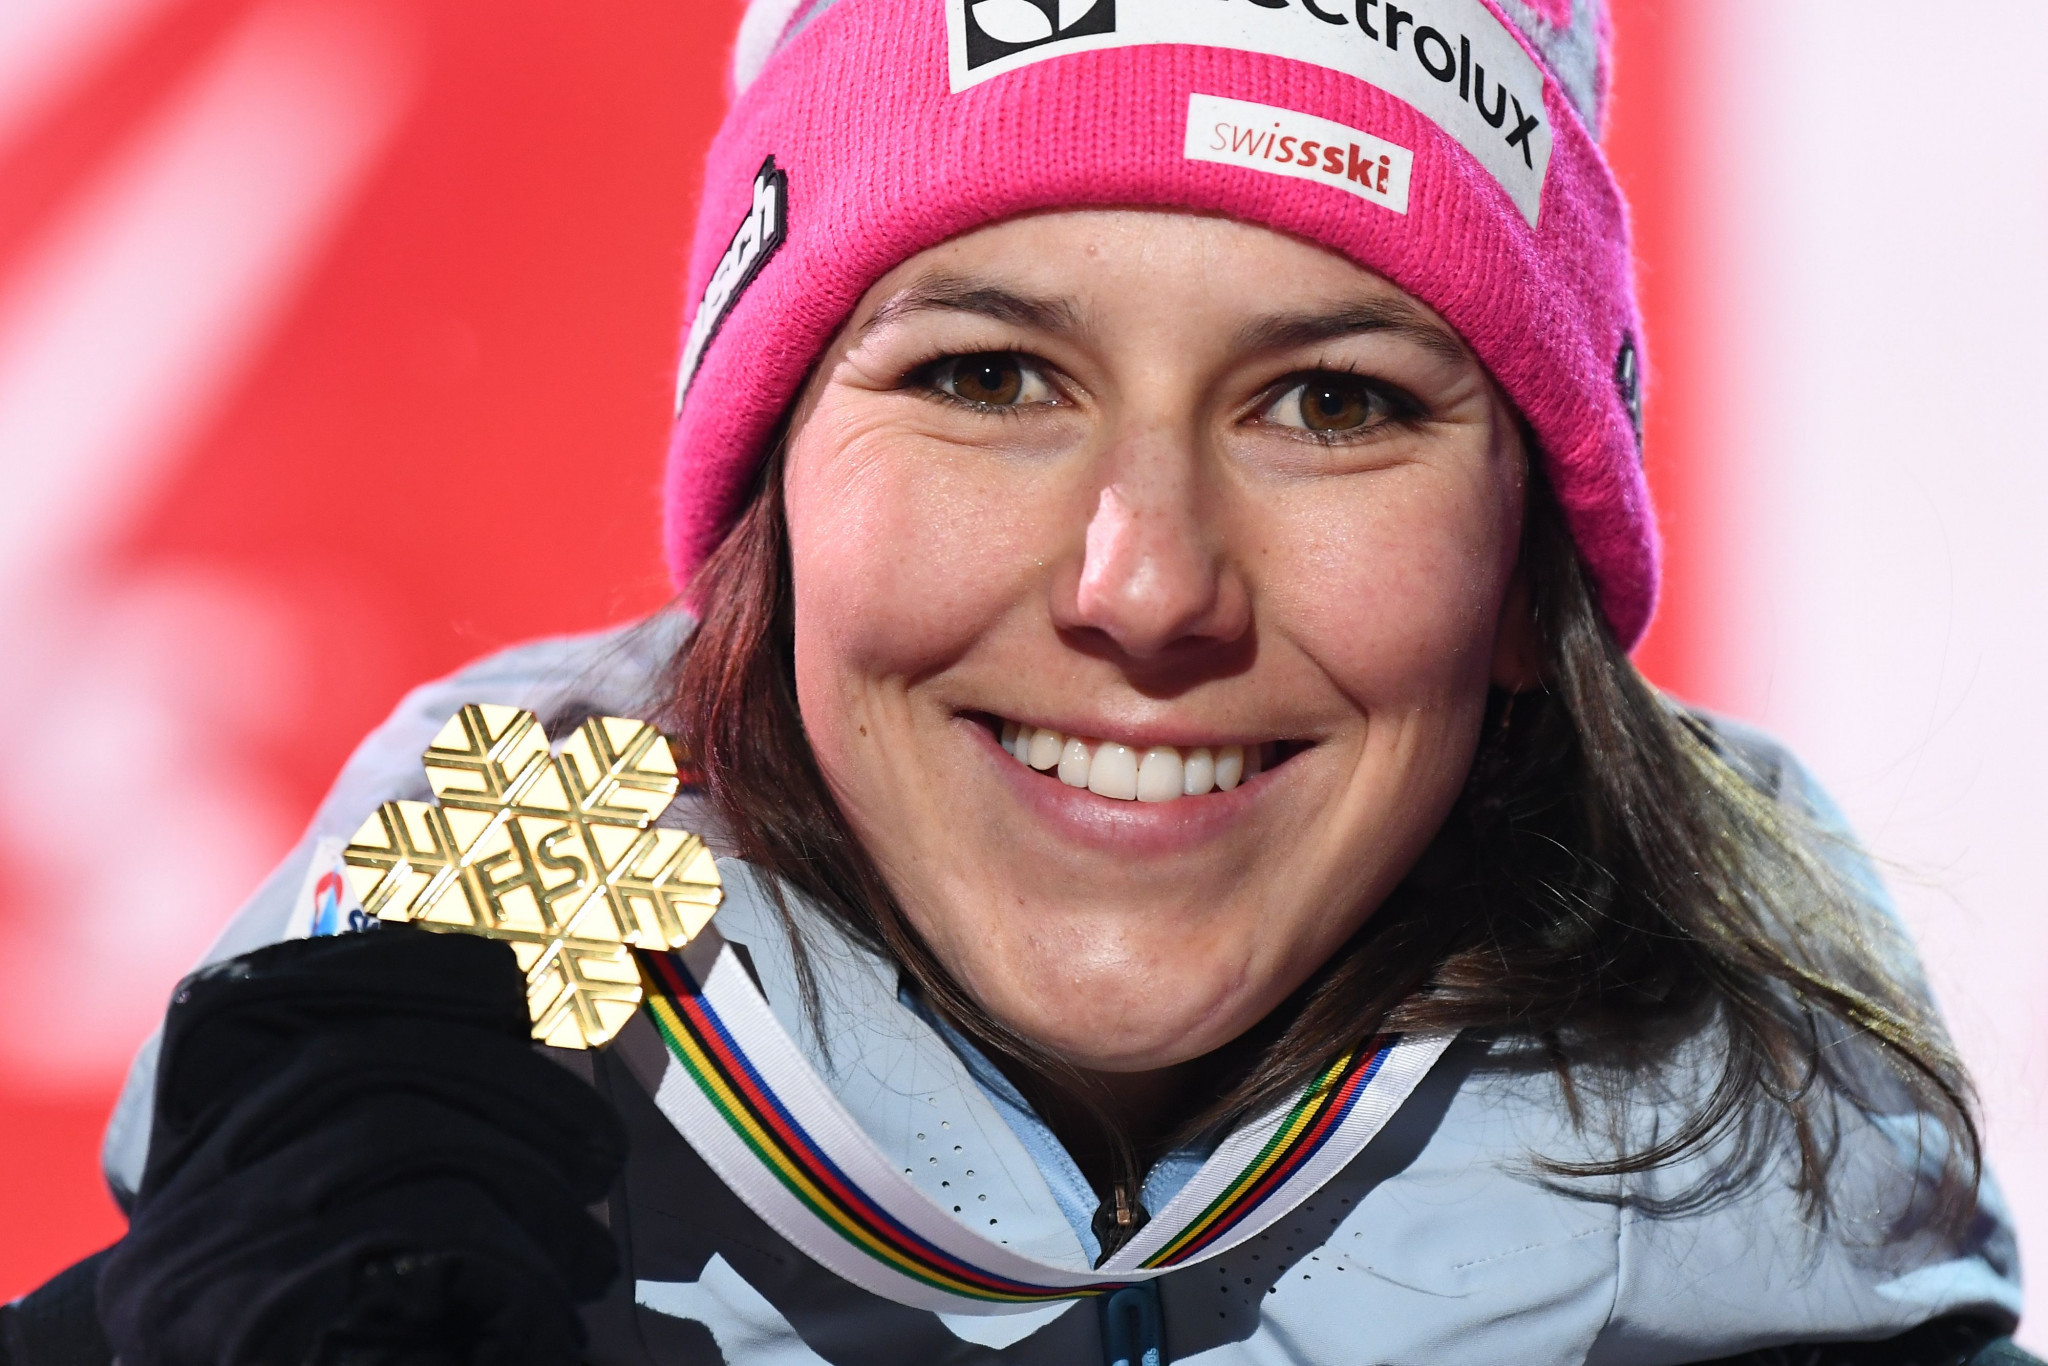 Wendy Holdener has now won two gold medals after her Alpine combined success ©Getty Images